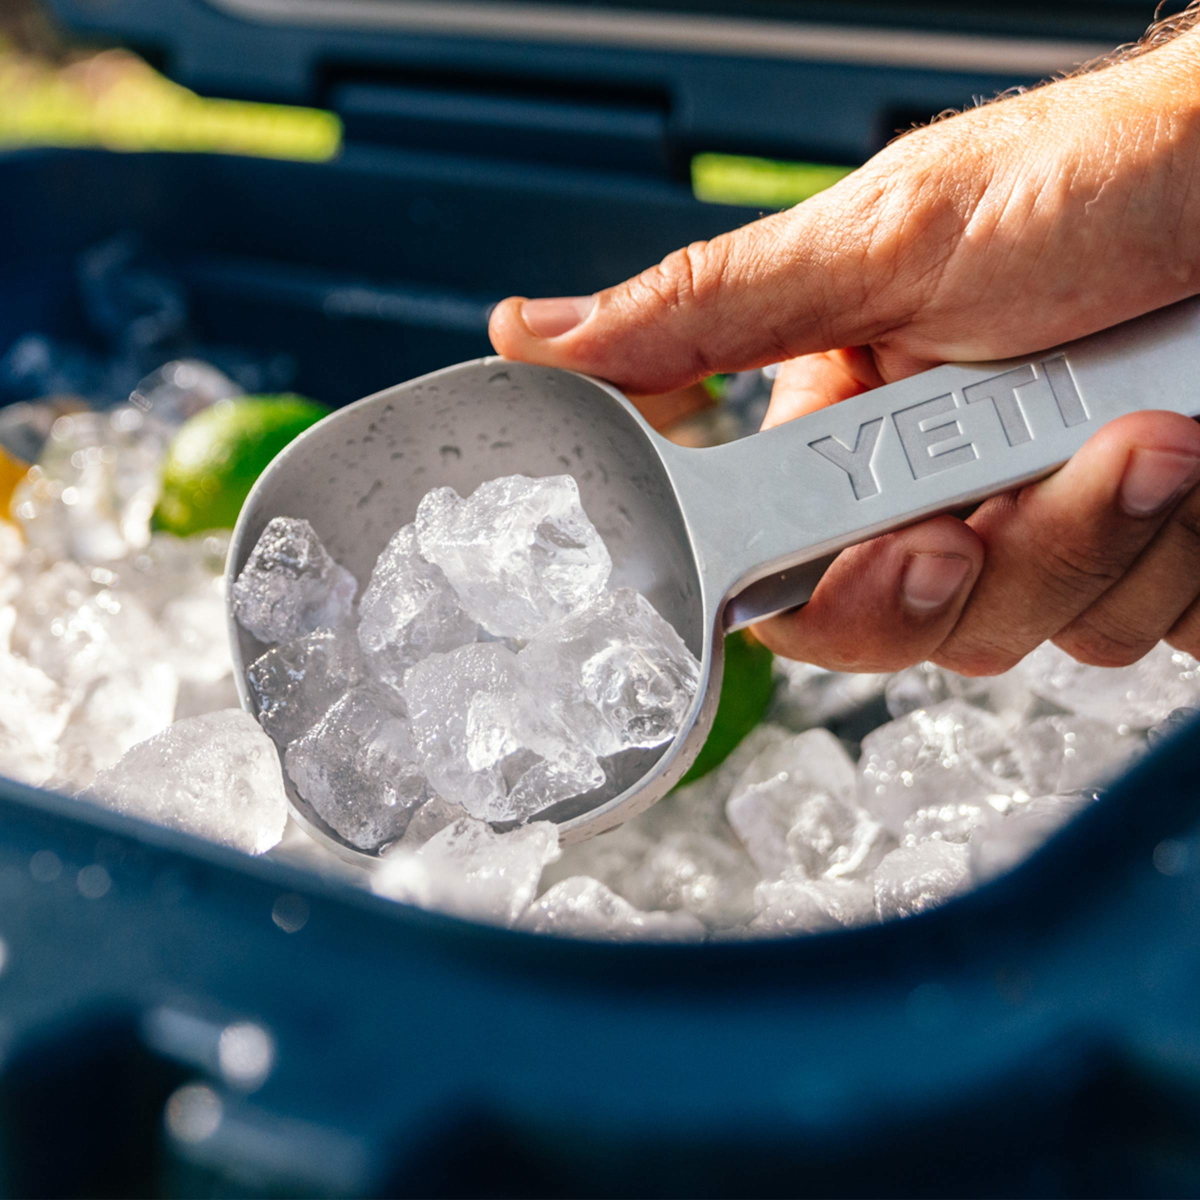 The Yeti Beverage Bucket Is a Must-Have for Outdoor Occasions